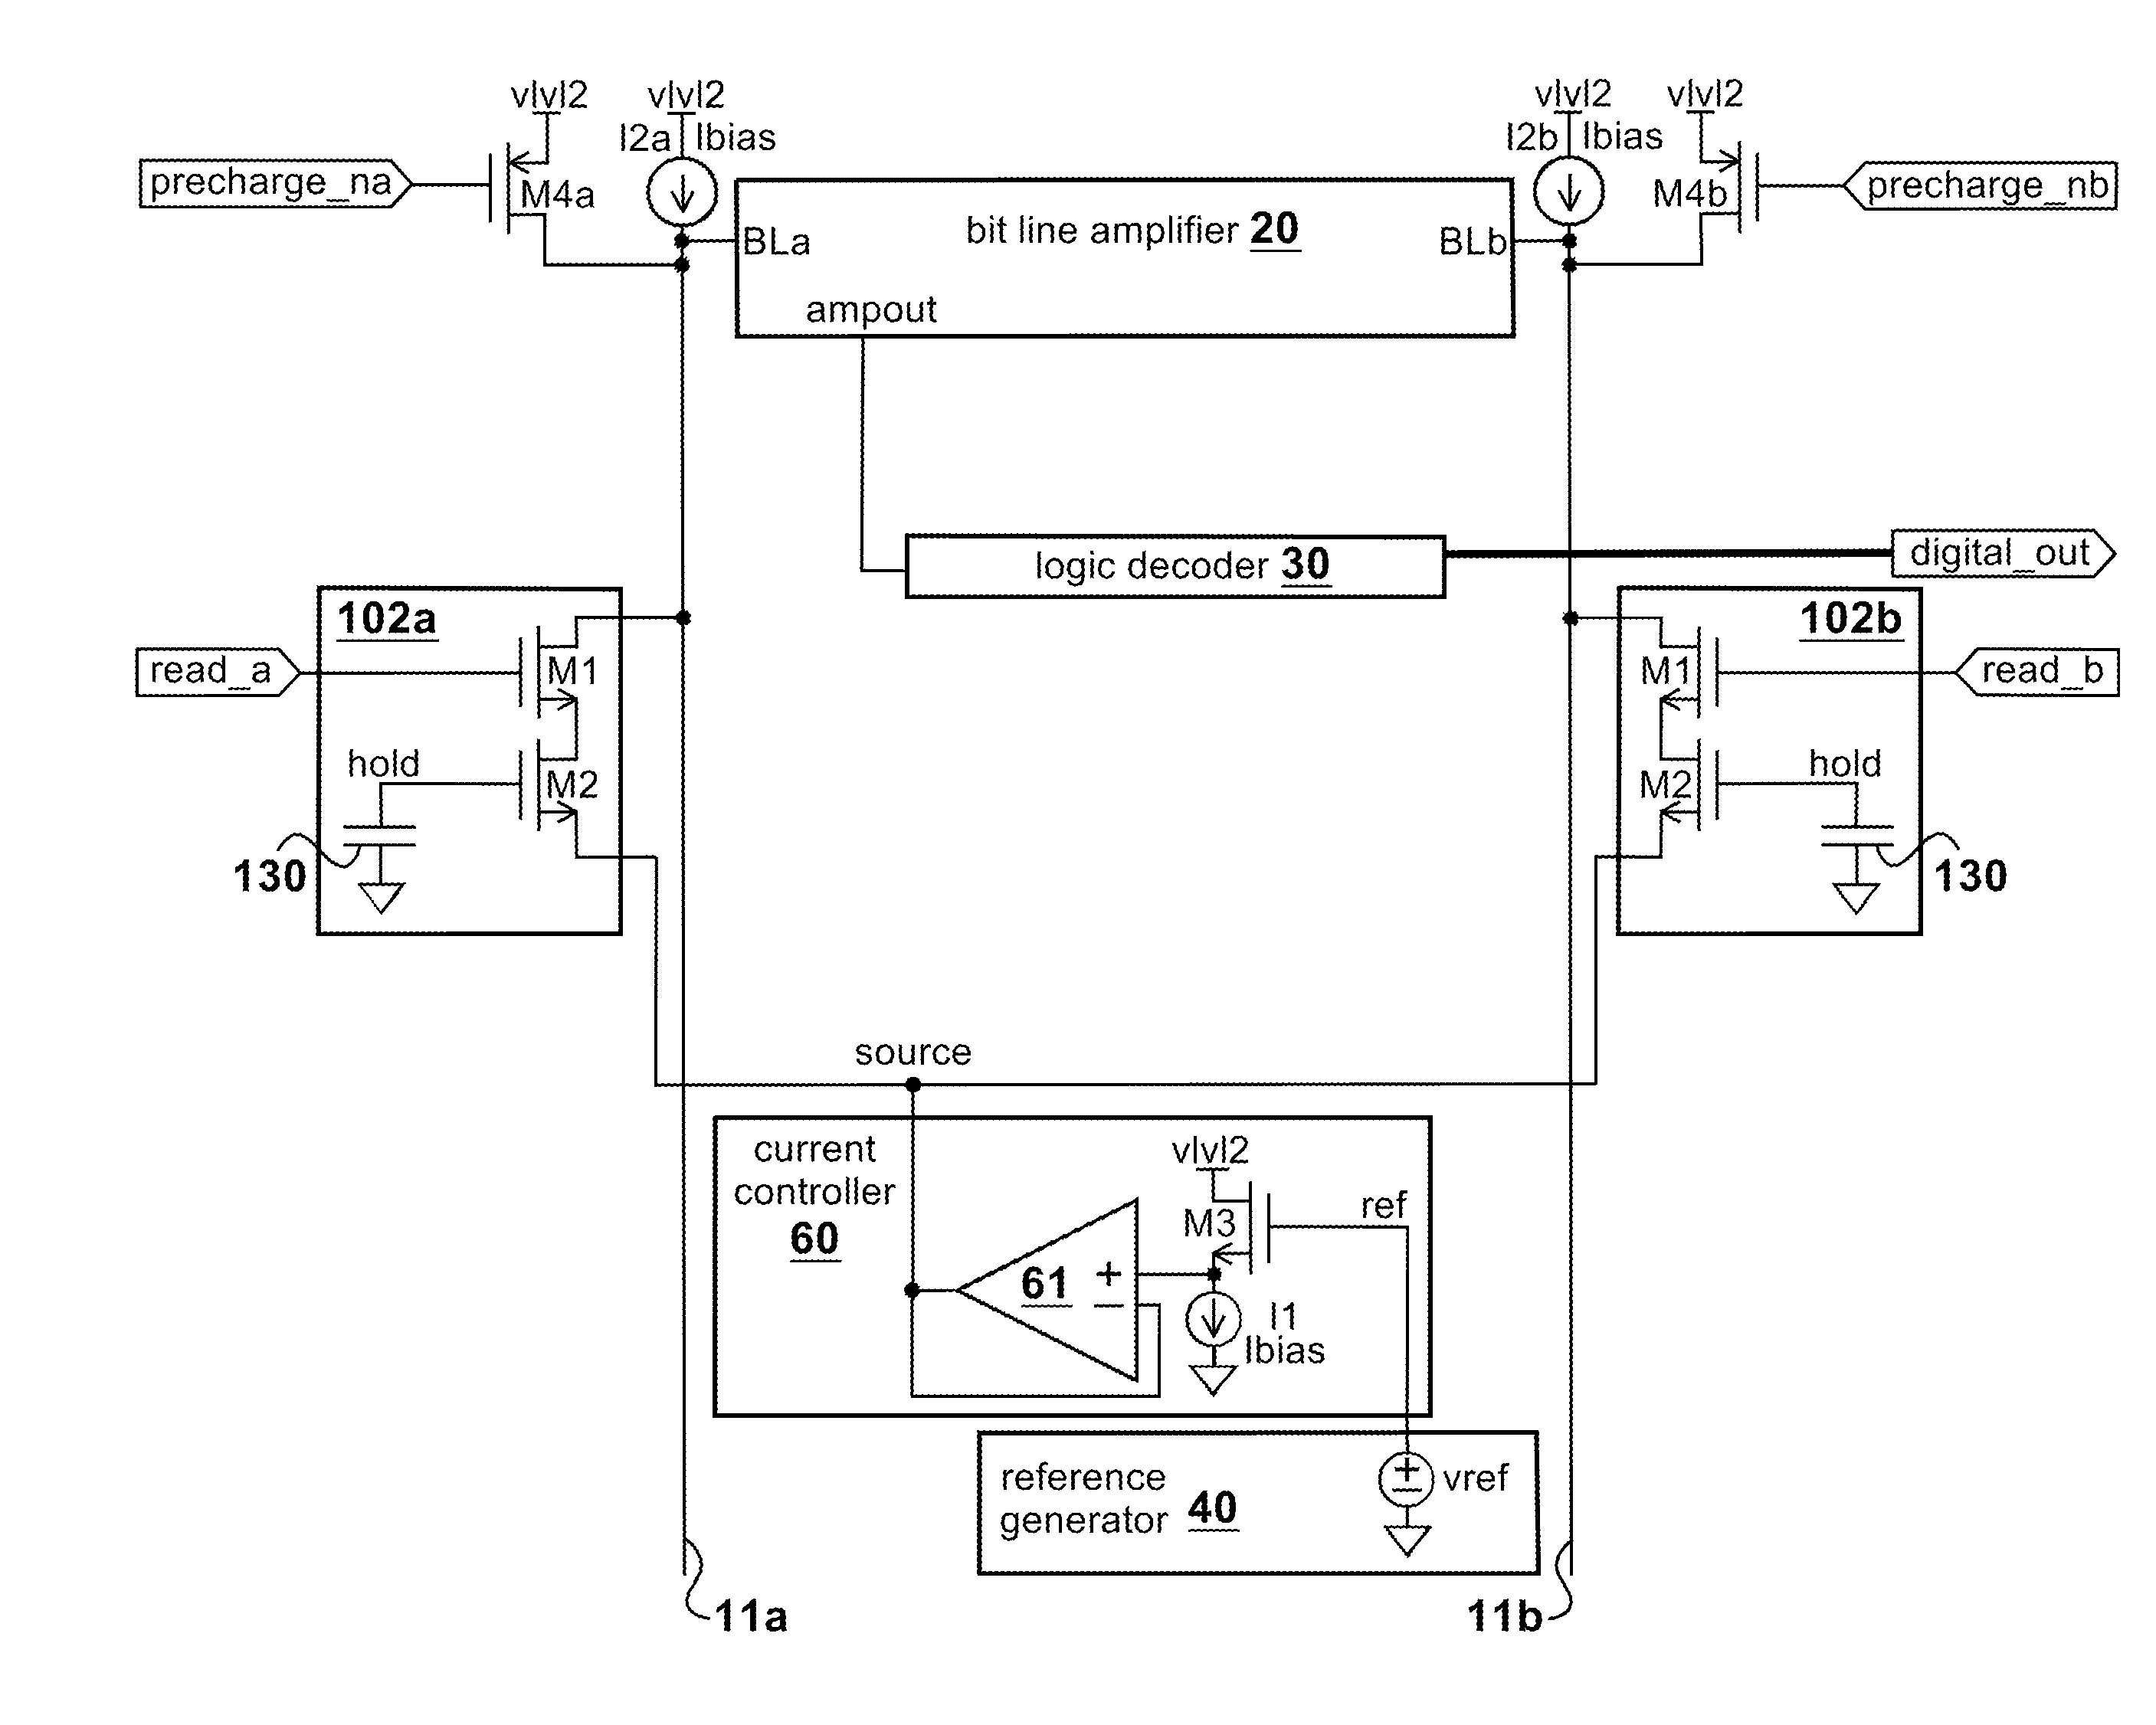 Memory architecture with a current controller and reduced power requirements